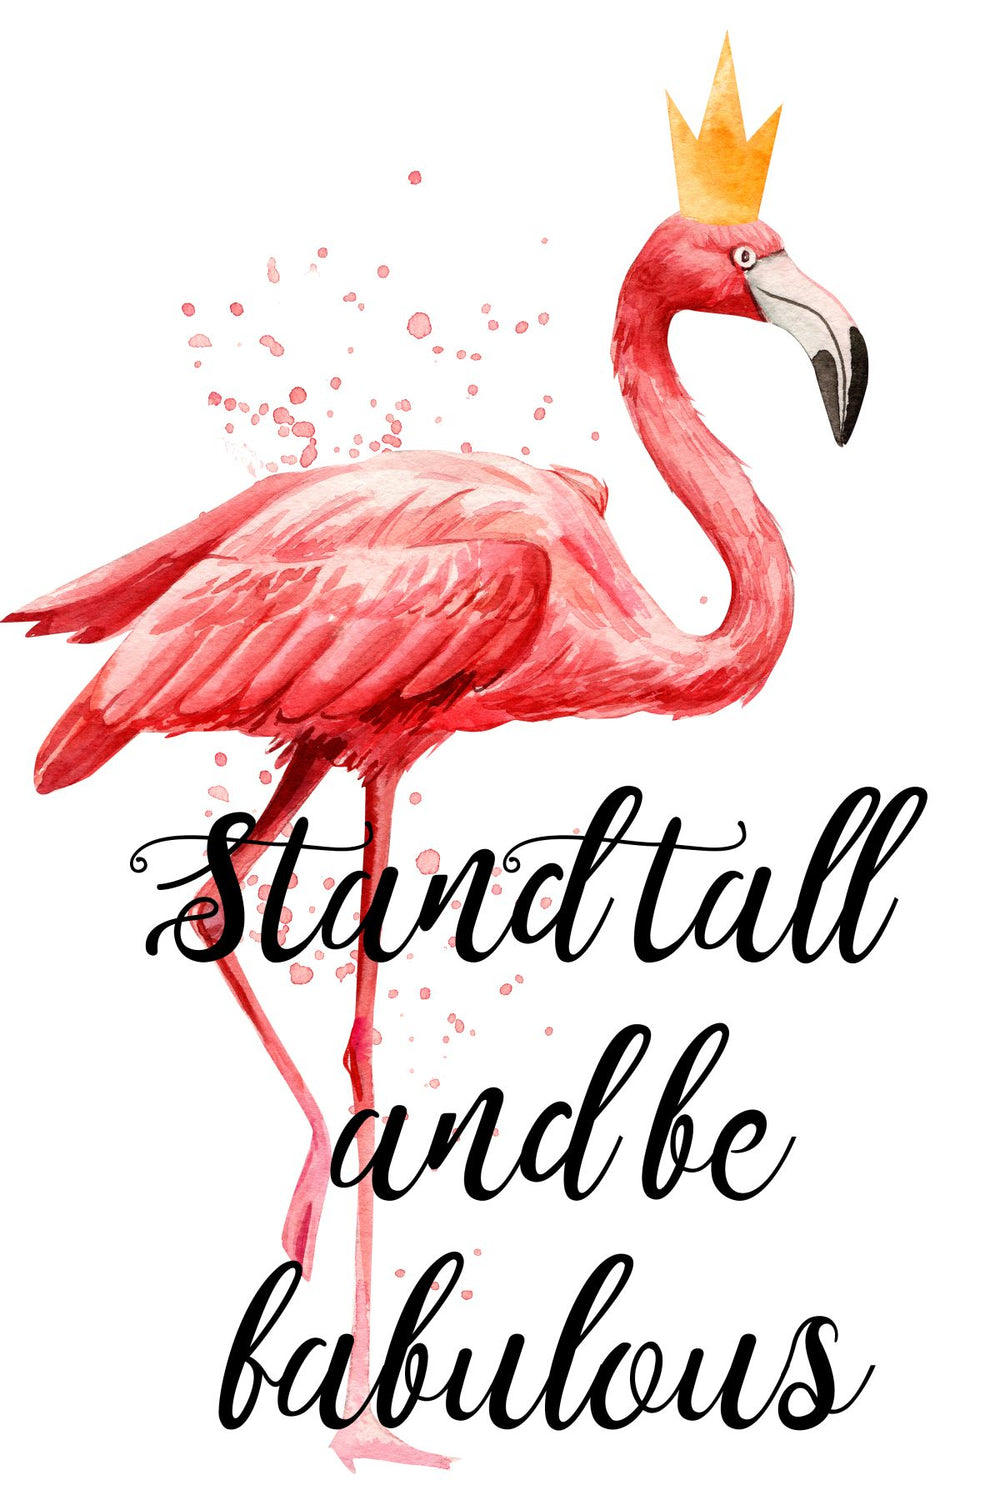 Stand Tall And Be Fabulous Quote